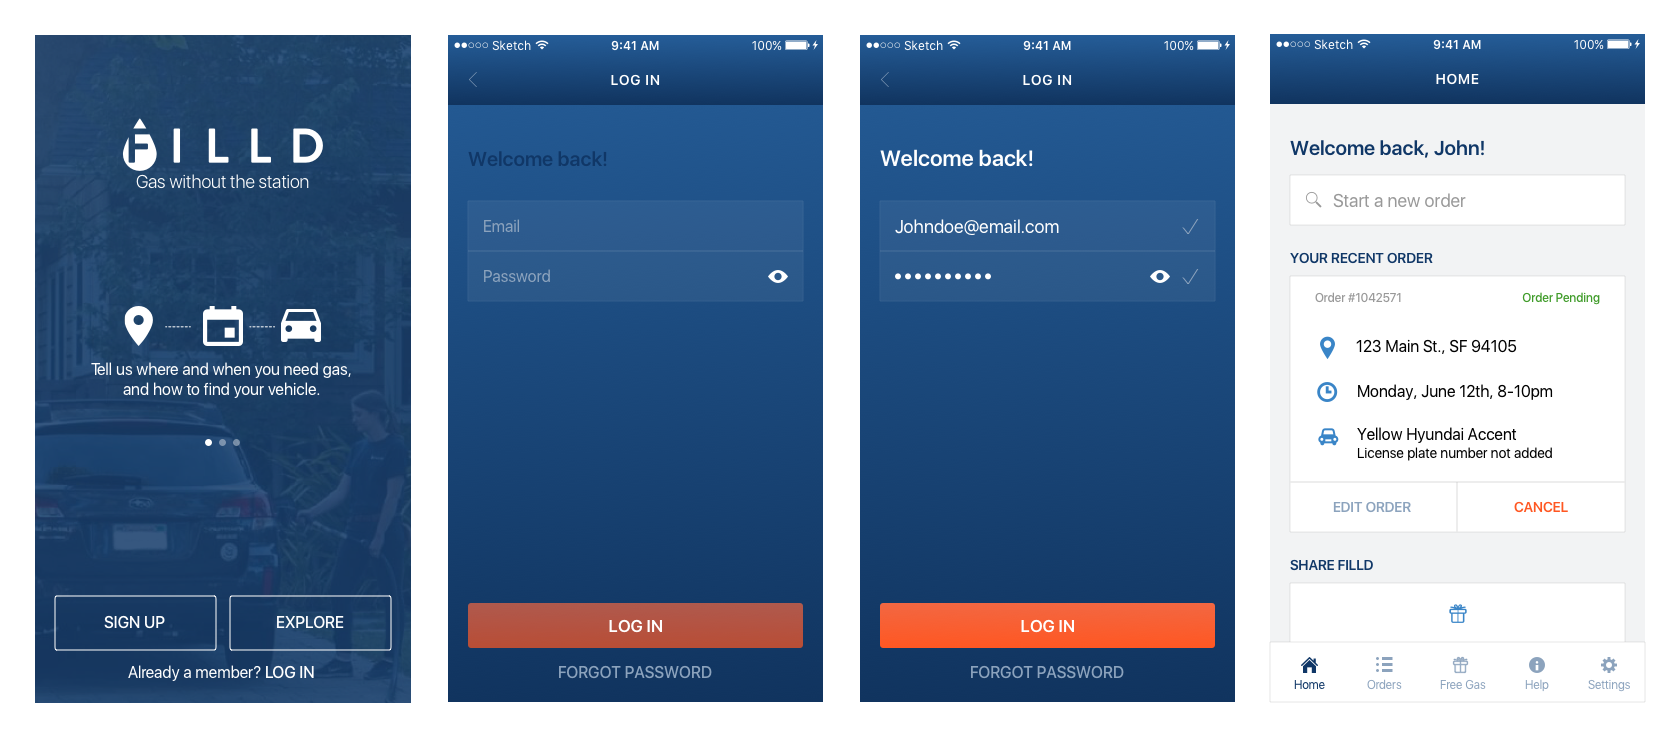 This shows 4 app screens that comprised the existing user log in flow before I redesigned it to incorporate OAuth.